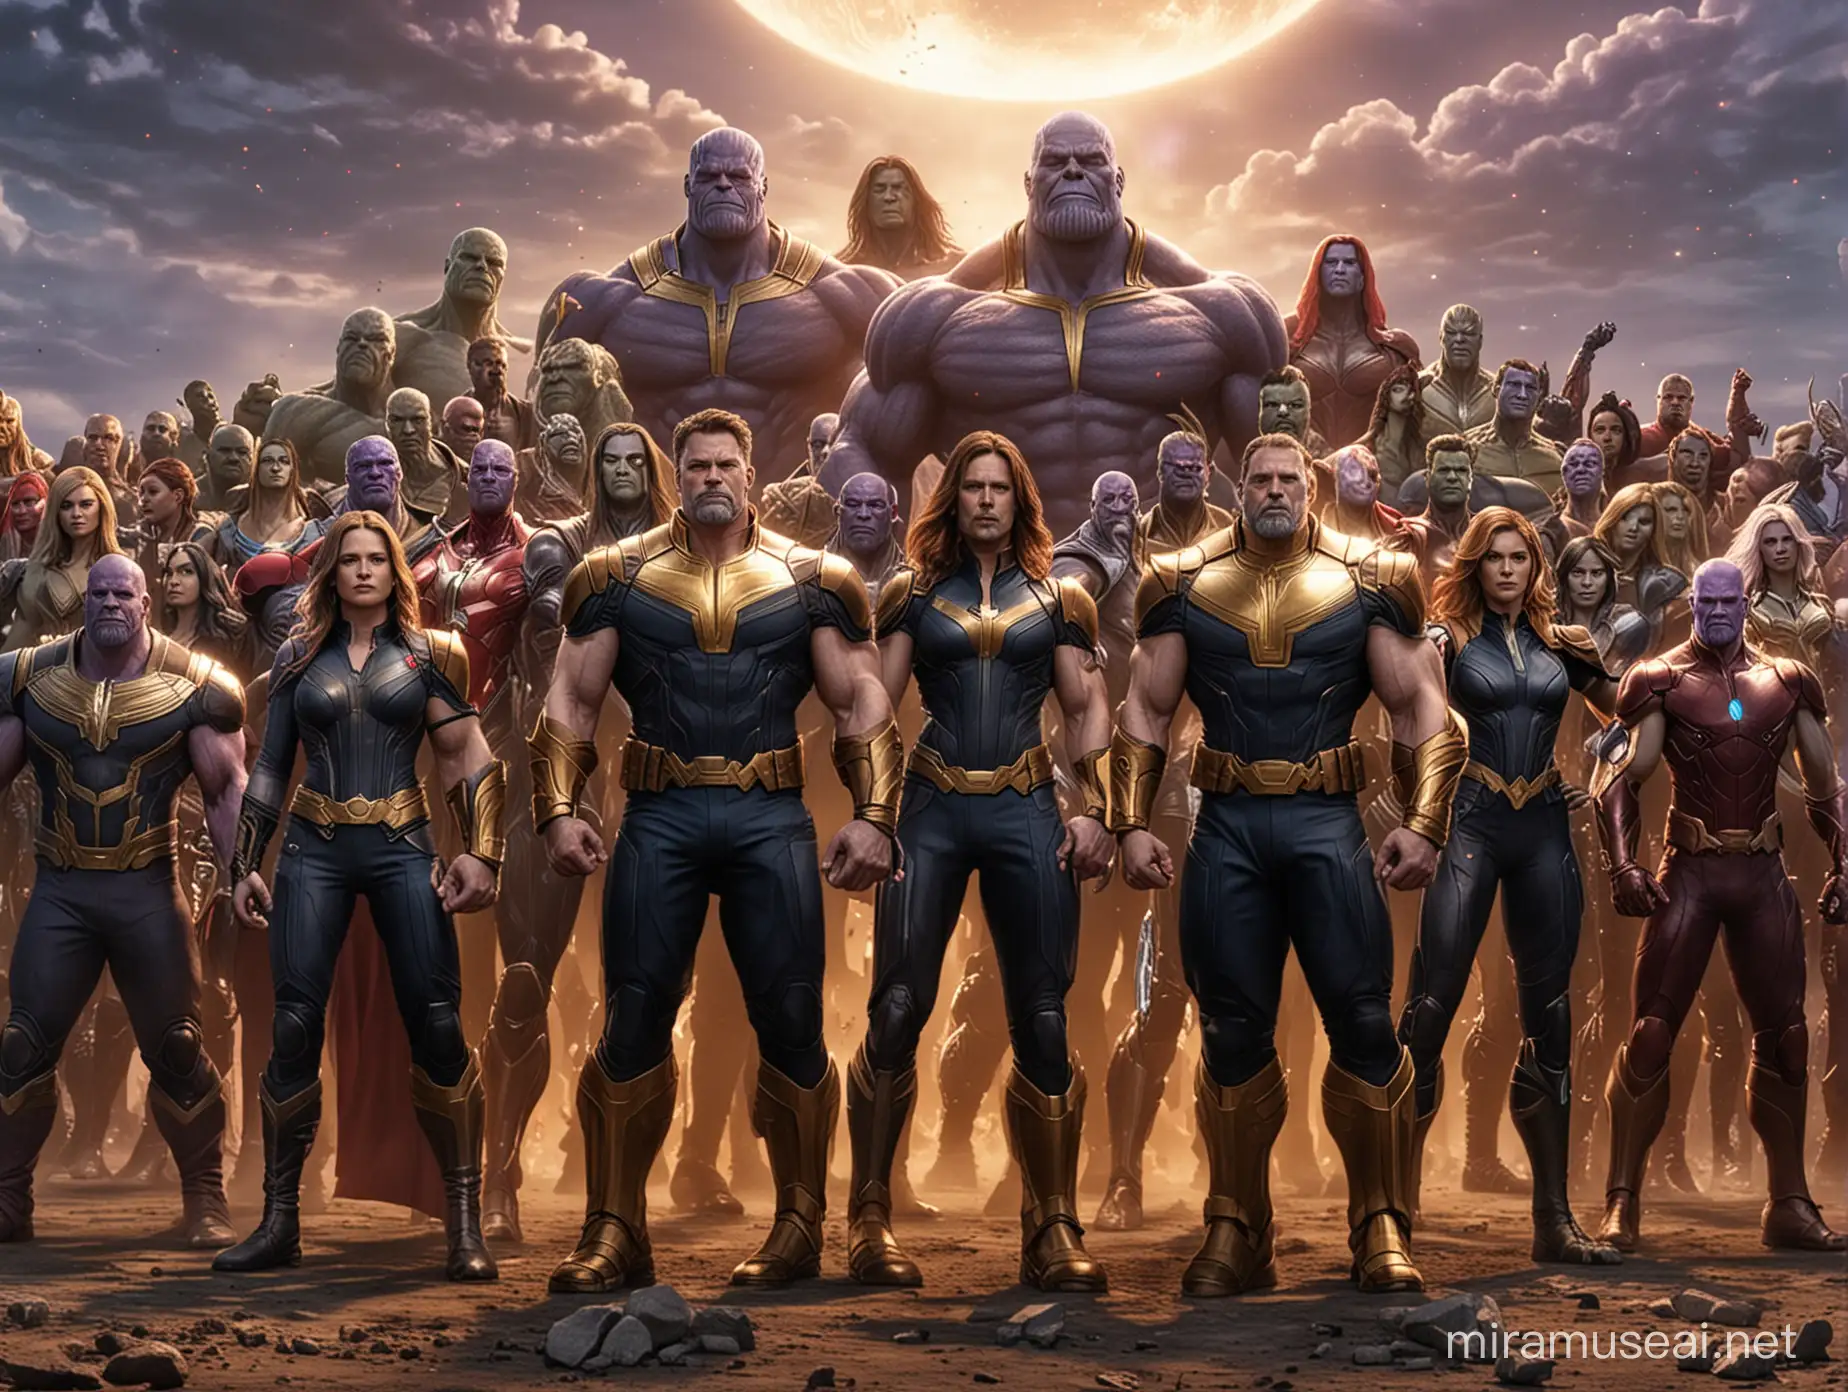 all the heroes from Marvel Universe standing up against the Thanos